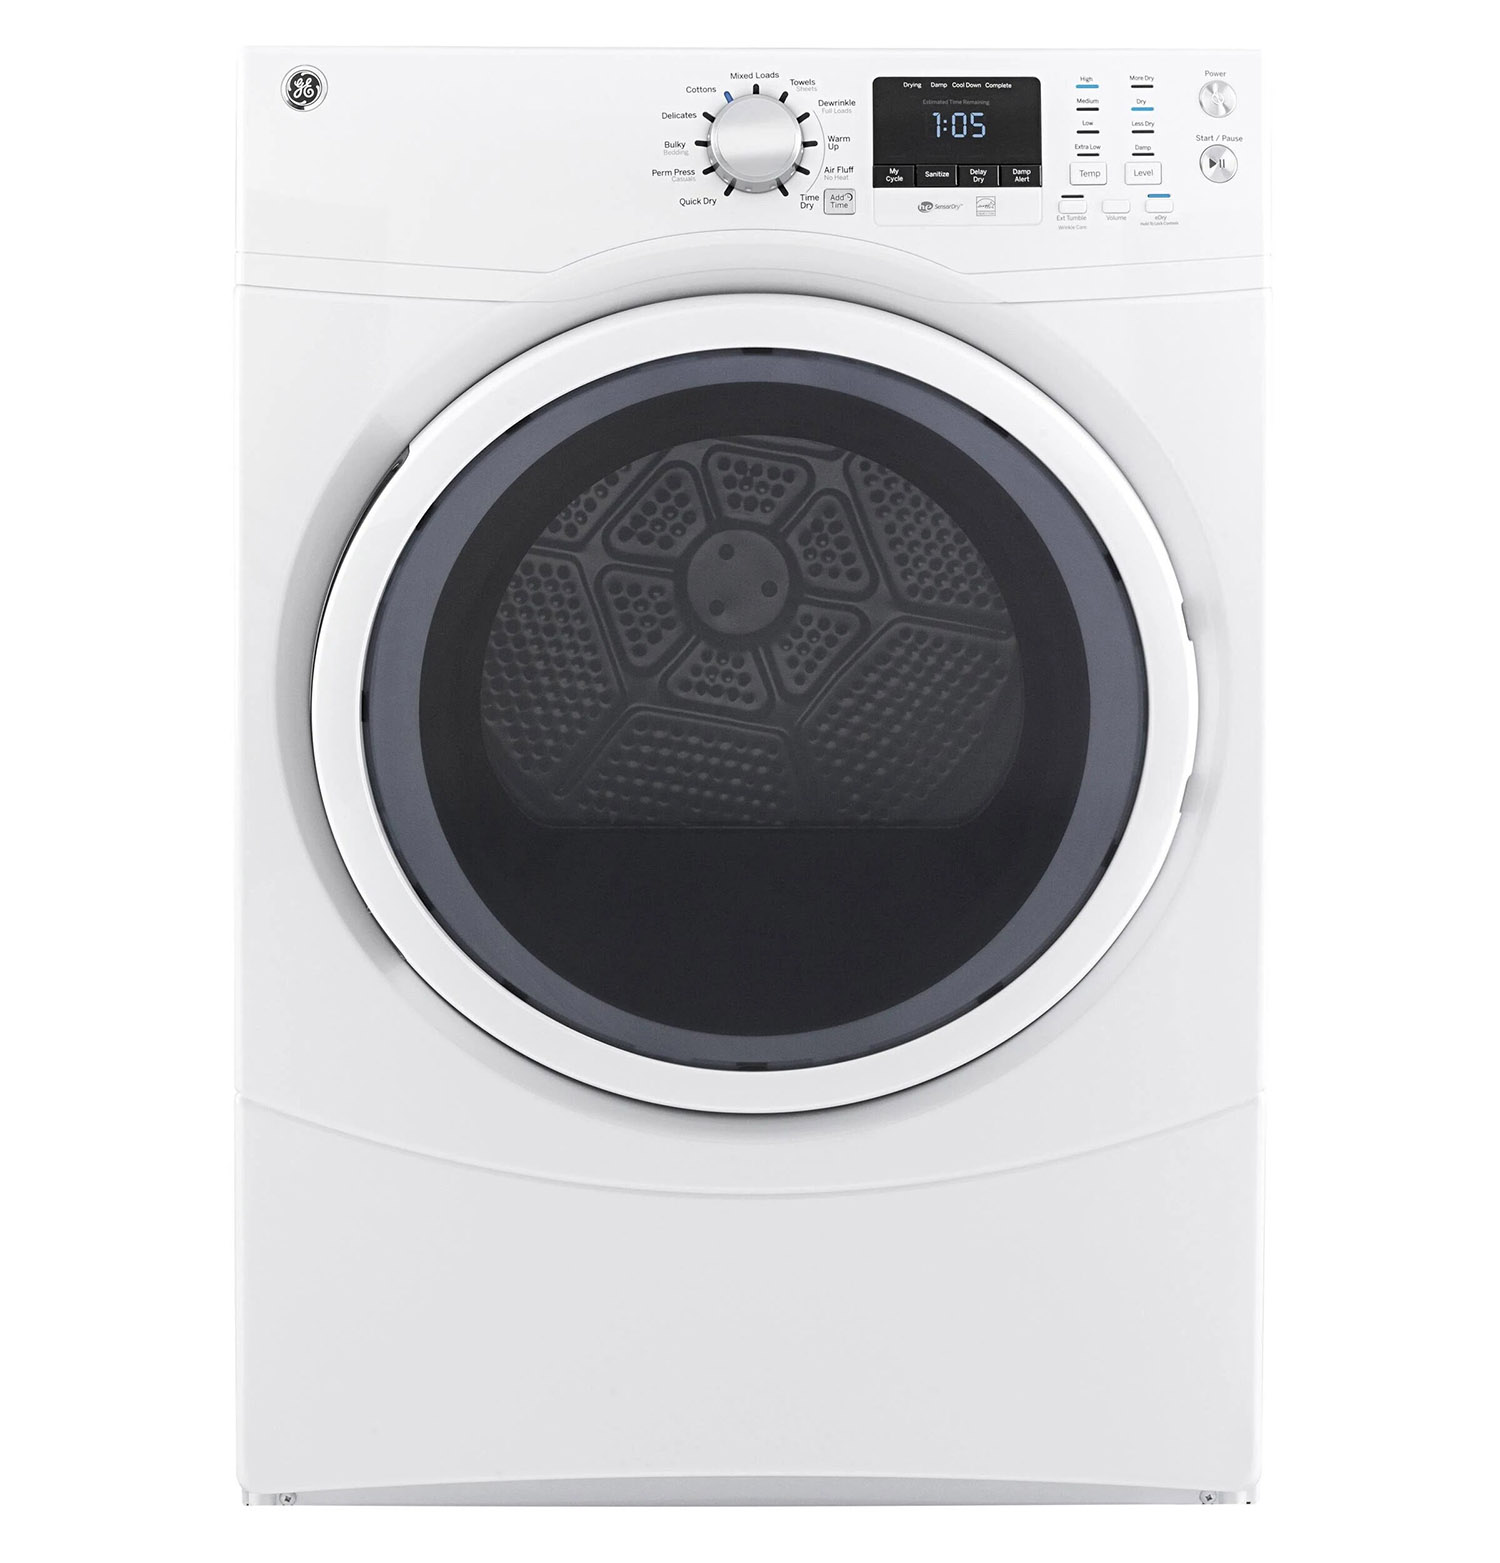 How To Fix The Error Code E22 For GE Dryer